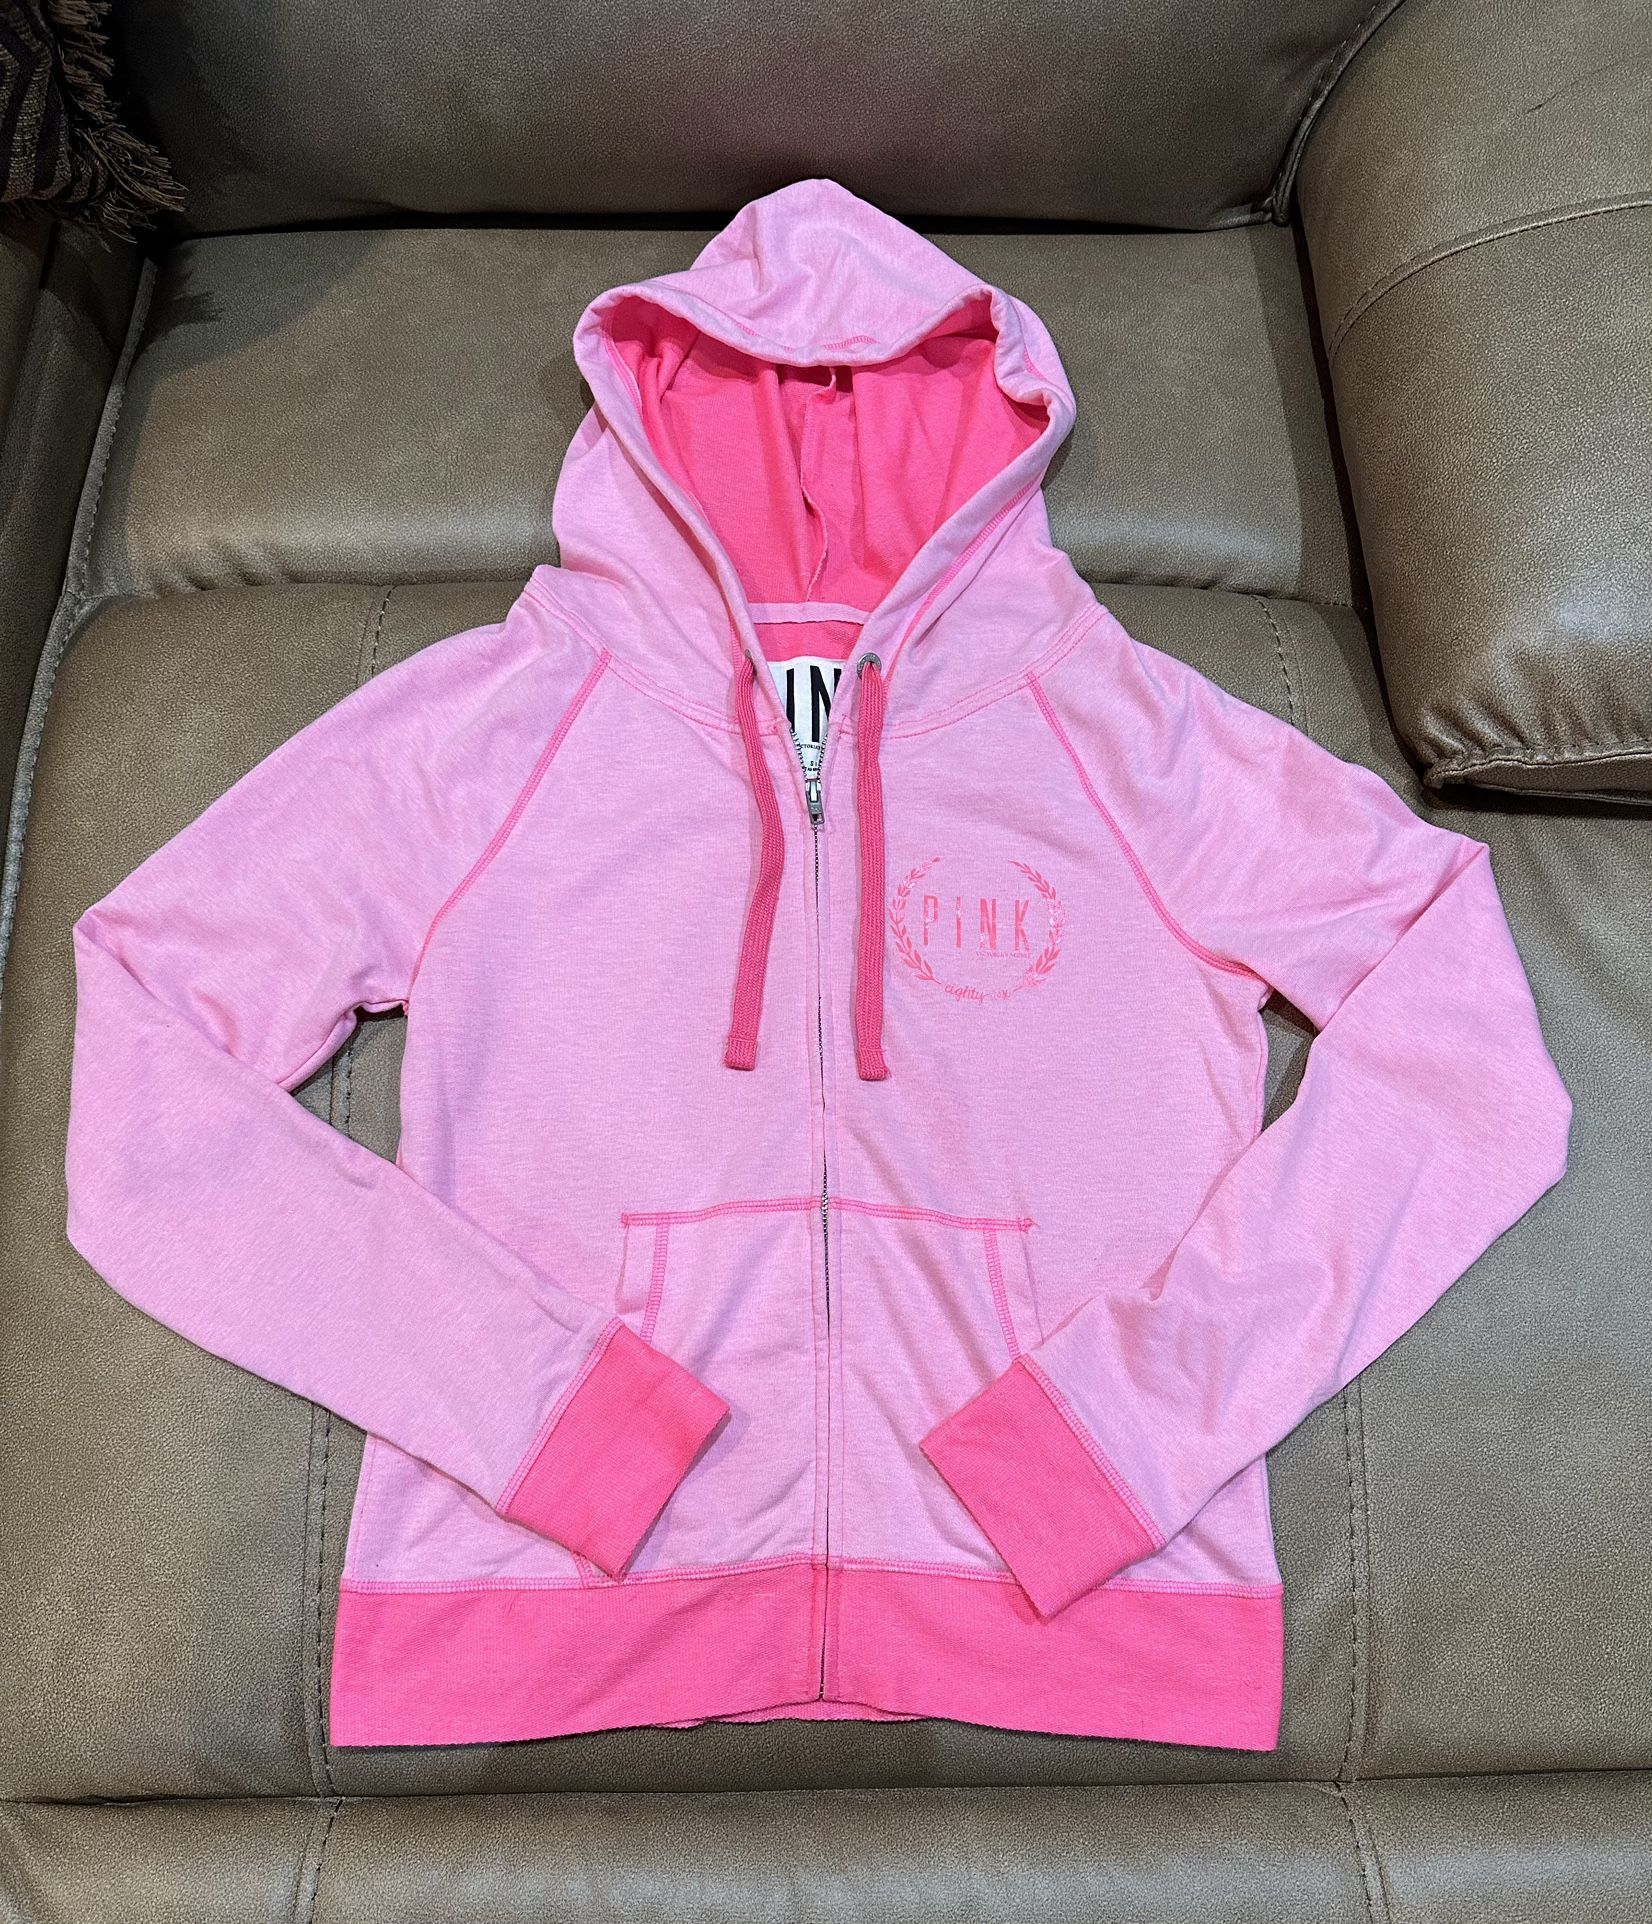 💕PINK By Victoria’s Secret Hooded Jacket💕